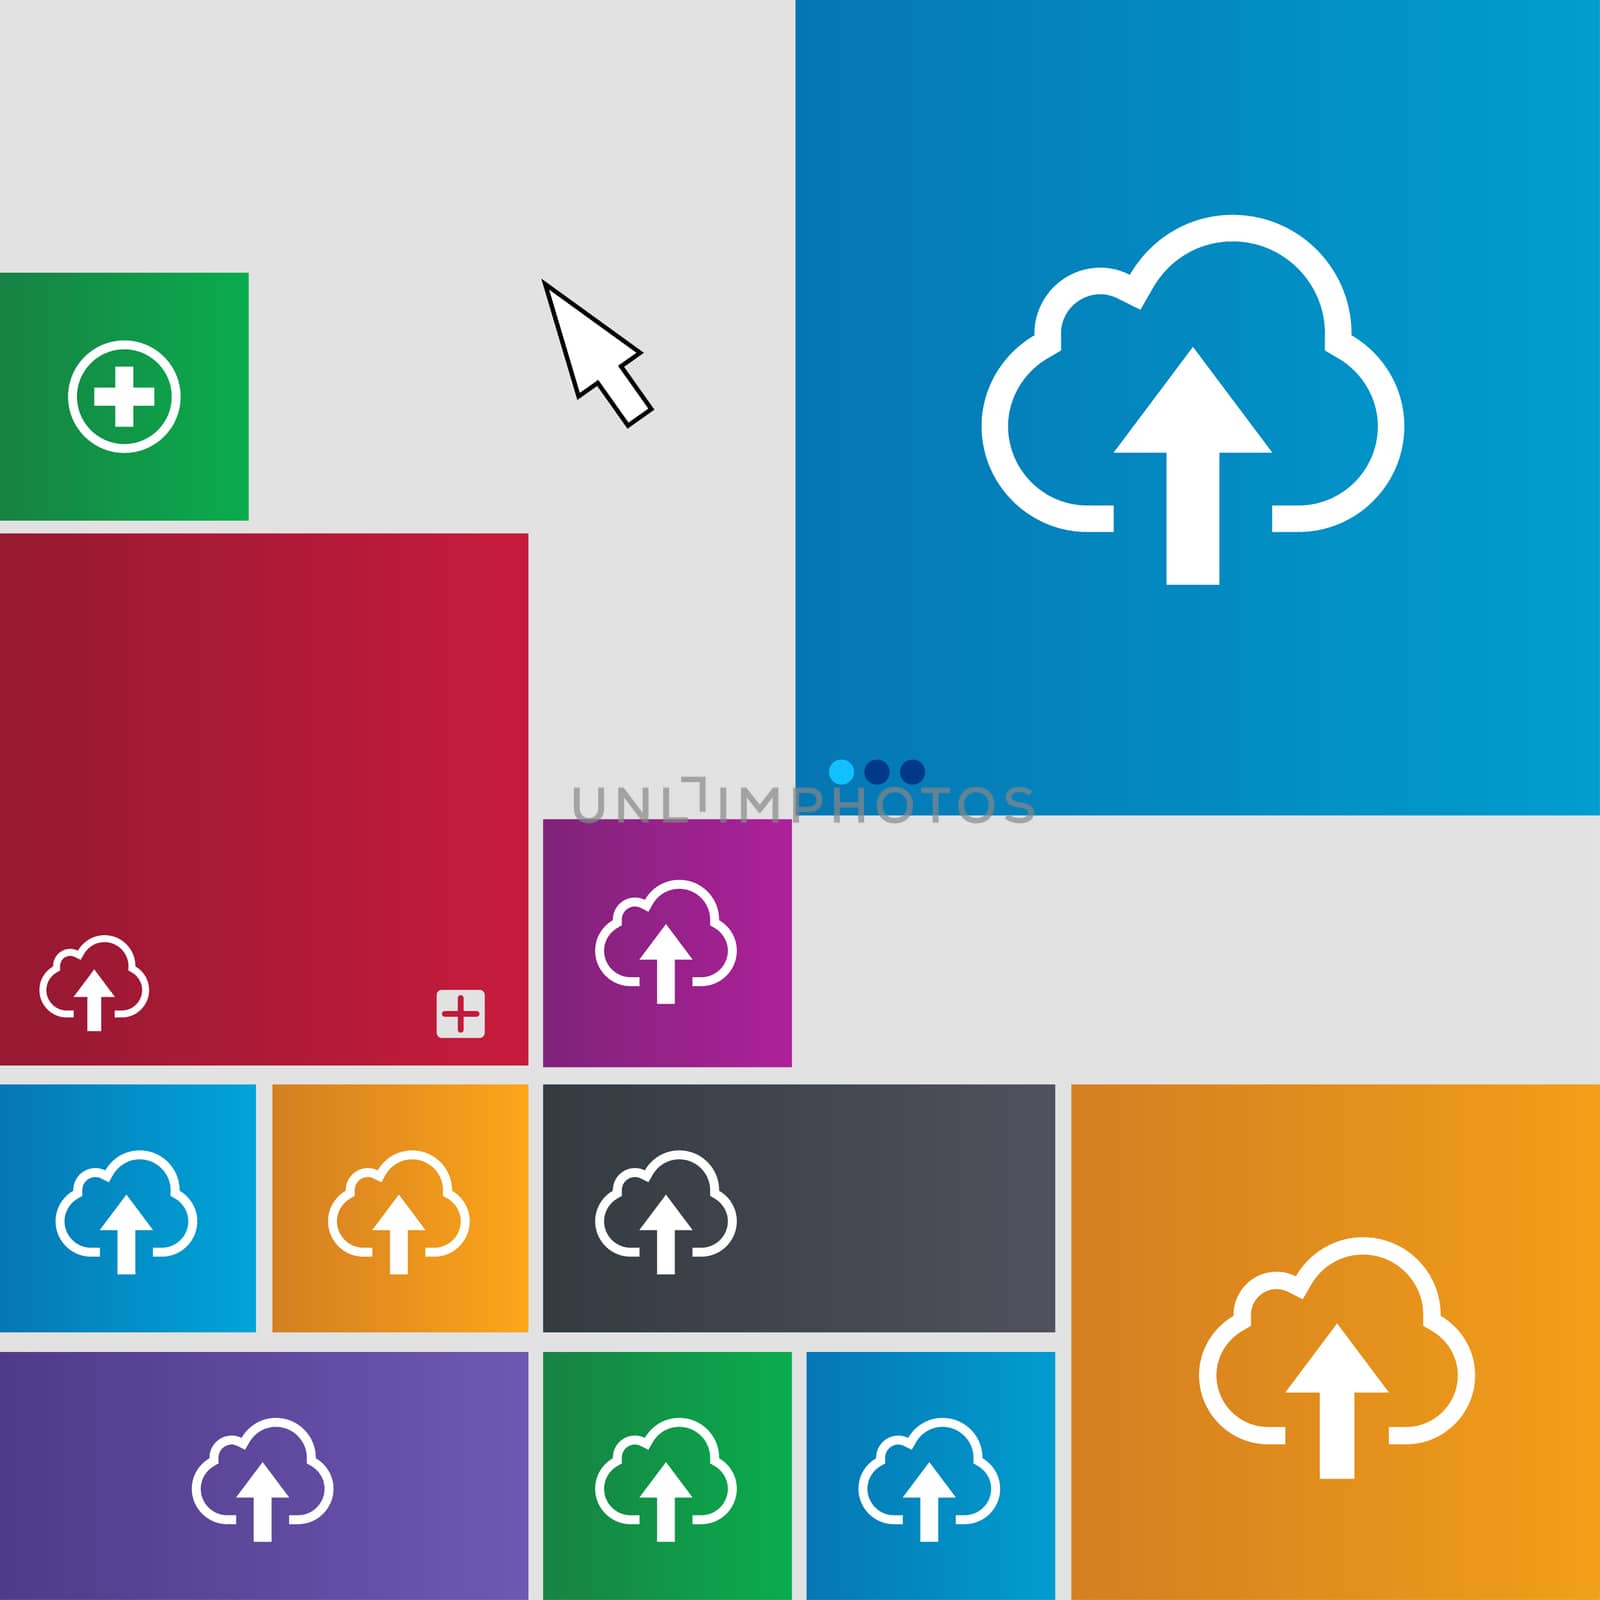 Upload from cloud icon sign. Metro style buttons. Modern interface website buttons with cursor pointer. illustration